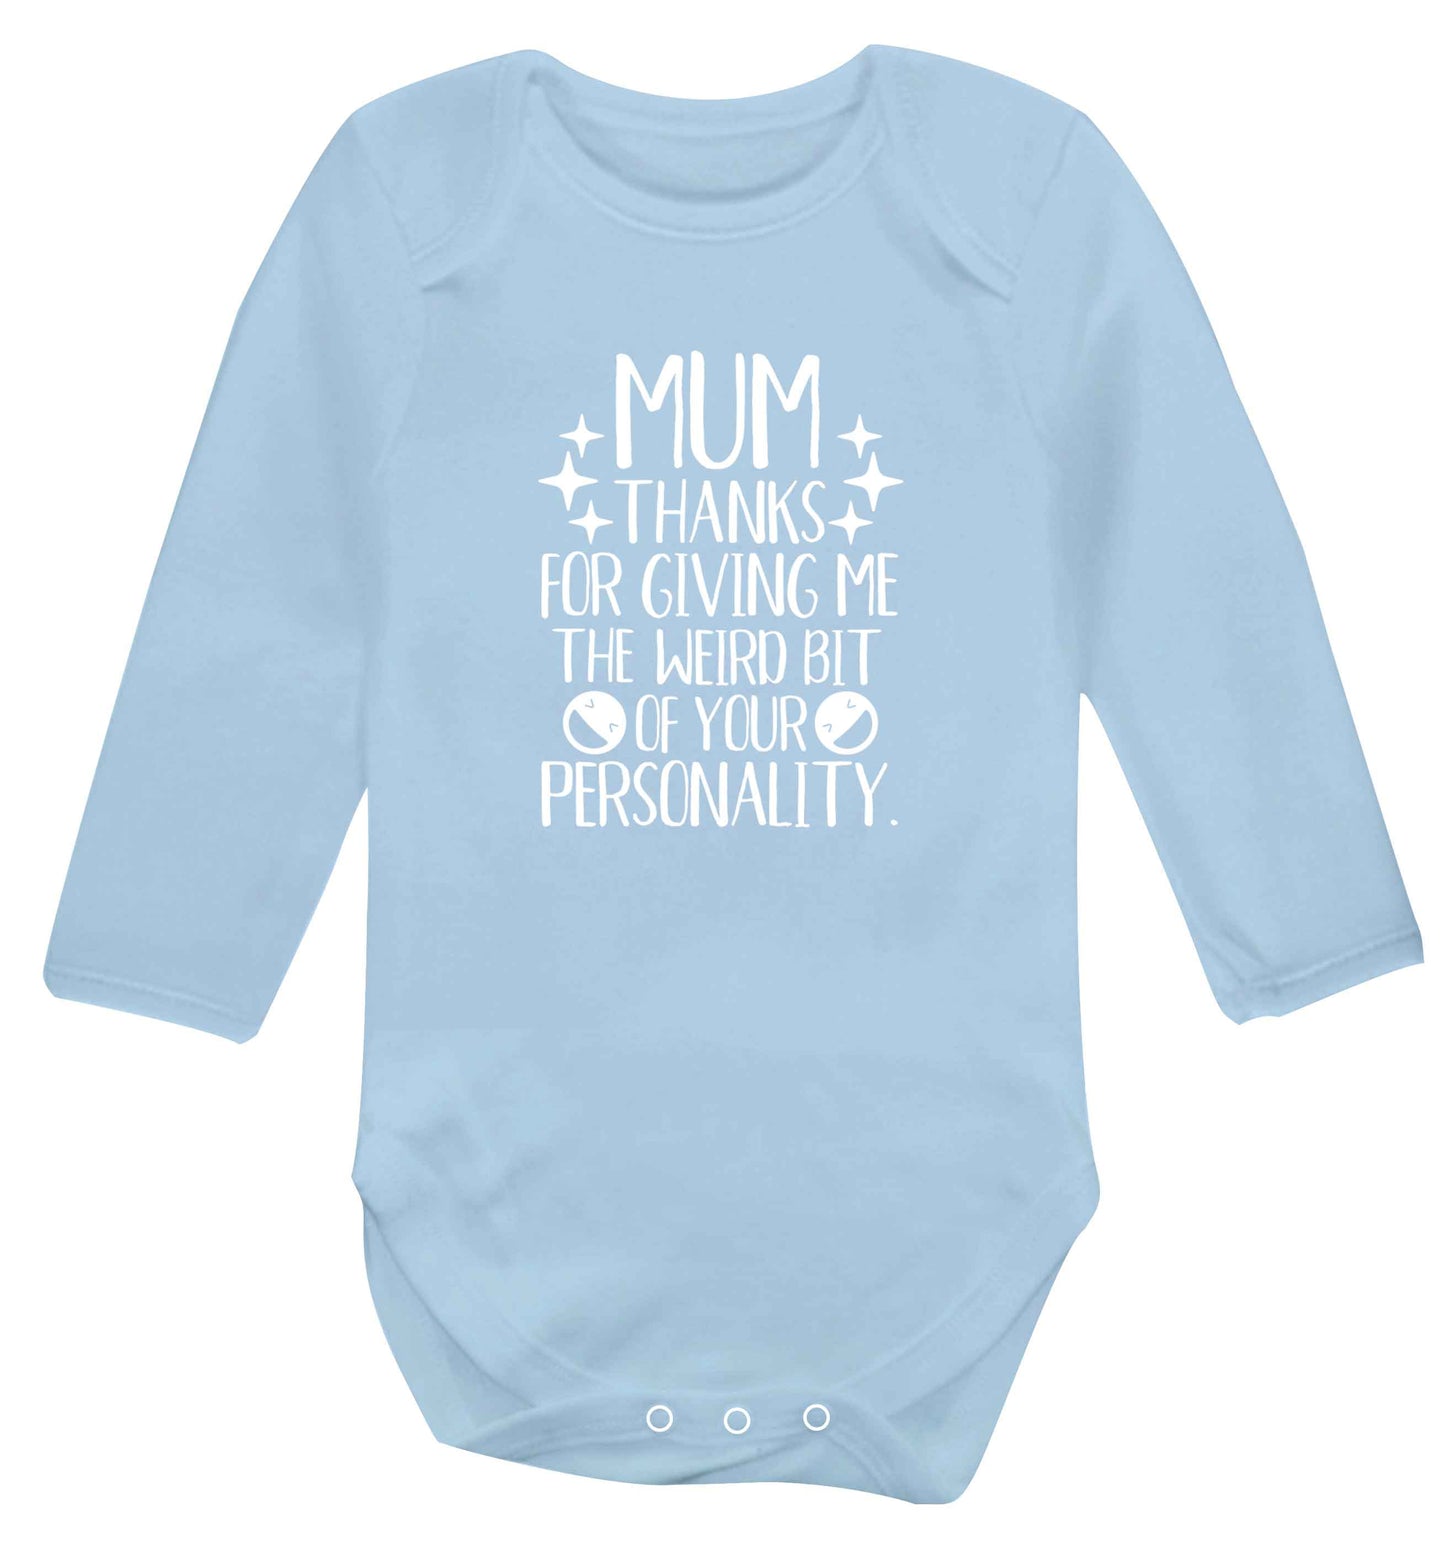 Mum thanks for giving me the weird bit of your personality baby vest long sleeved pale blue 6-12 months